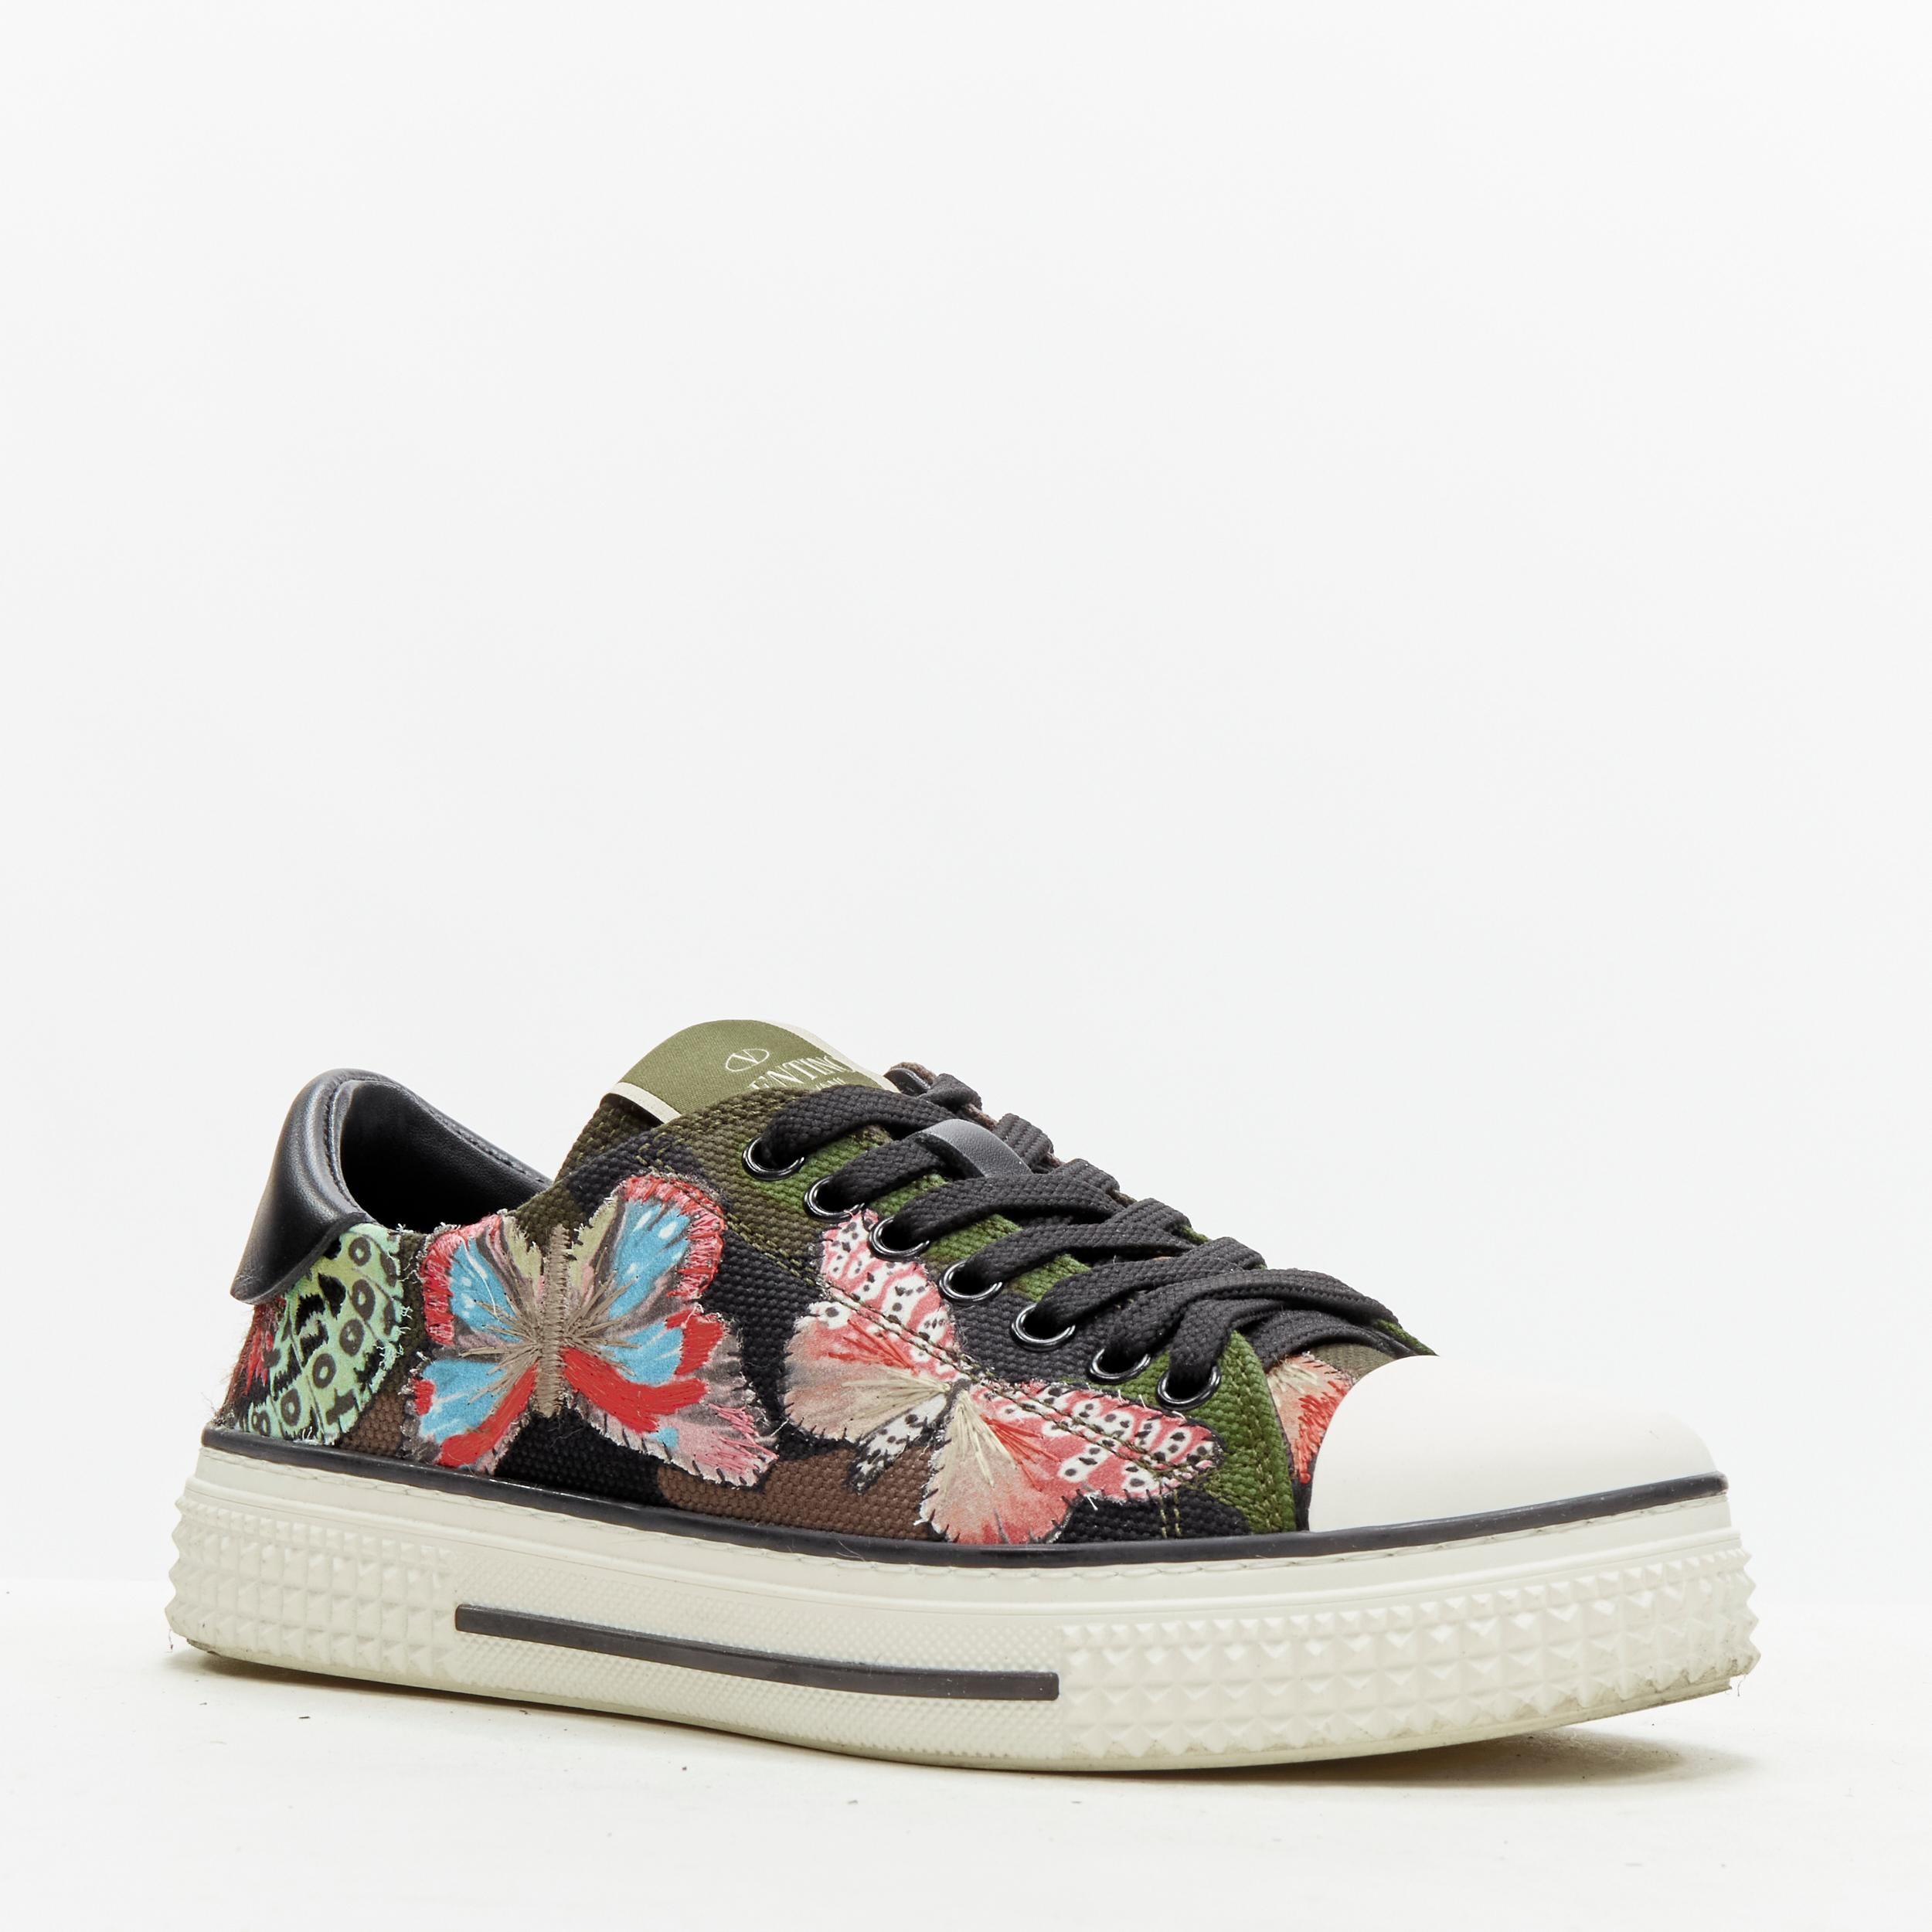 VALENTINO Butterfly embroidery green camouflage low top sneaker EU36 
Reference: ANWU/A00337 
Brand: Valentino 
Material: Canvas 
Color: Green 
Pattern: Camouflage 
Closure: Lace 
Extra Detail: Rockstud textured rubber outsole. 
Made in: Italy